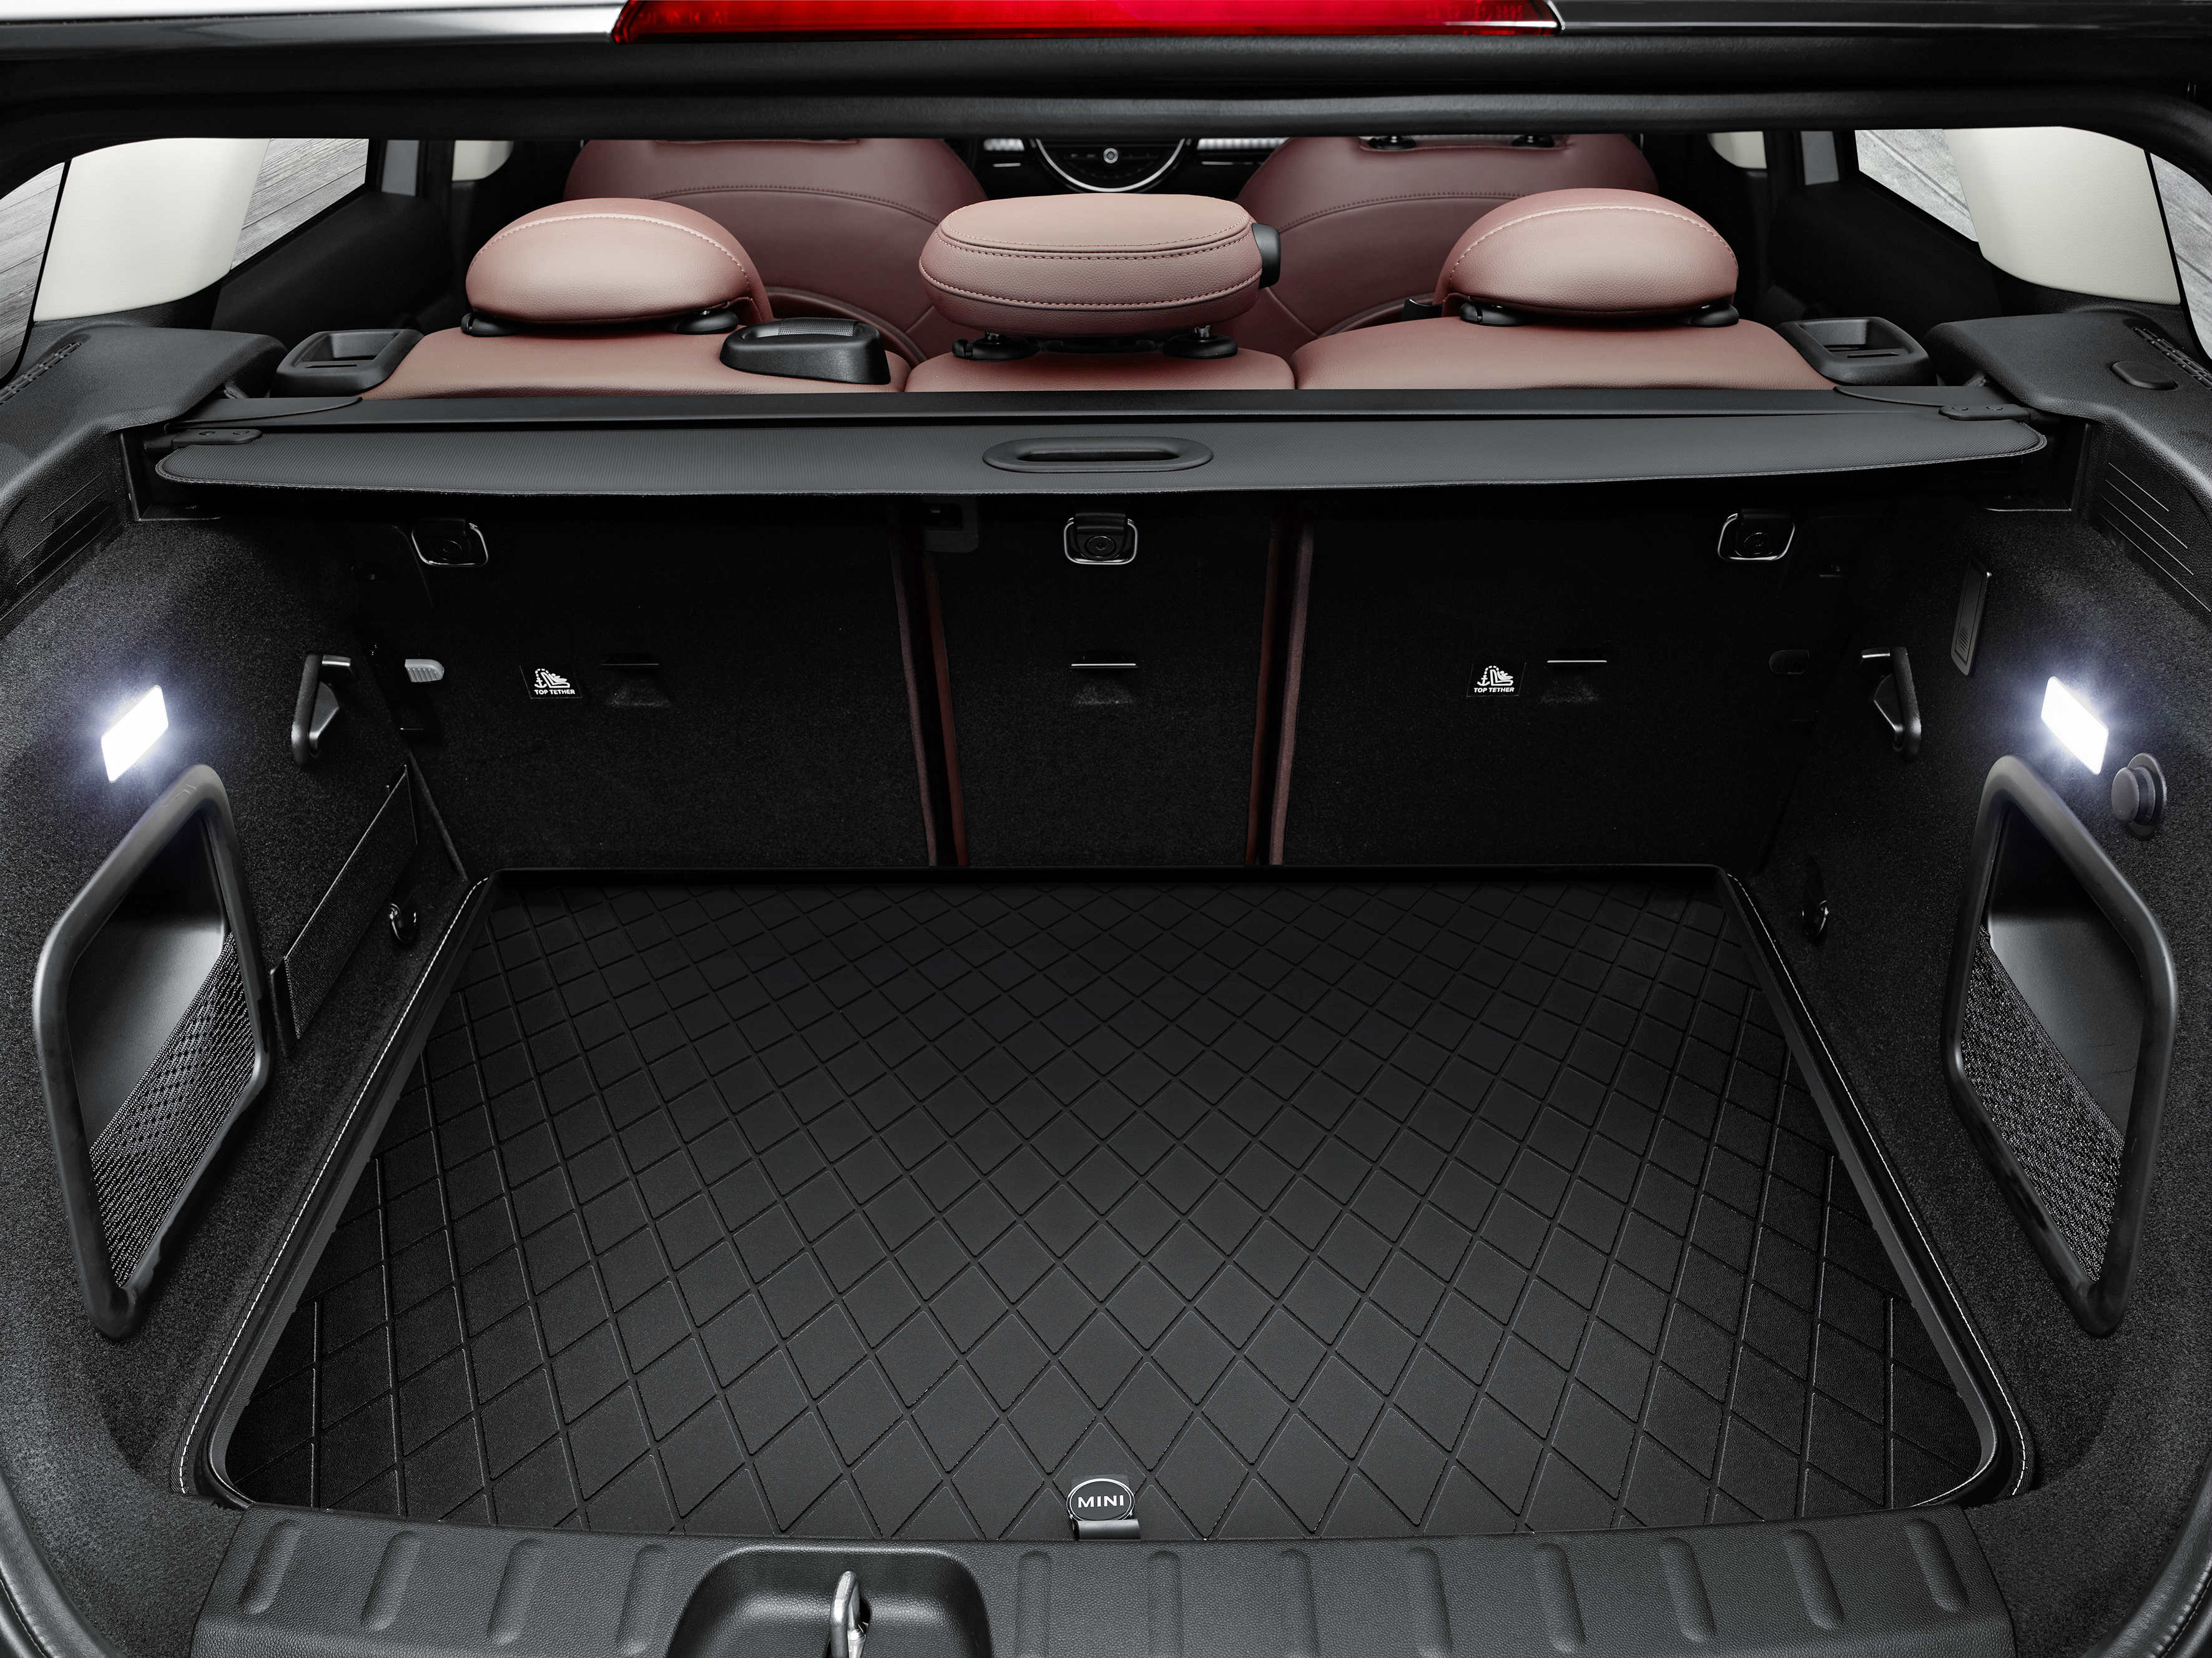 Mini Clubman 2015 offers 350 litres of luggage space